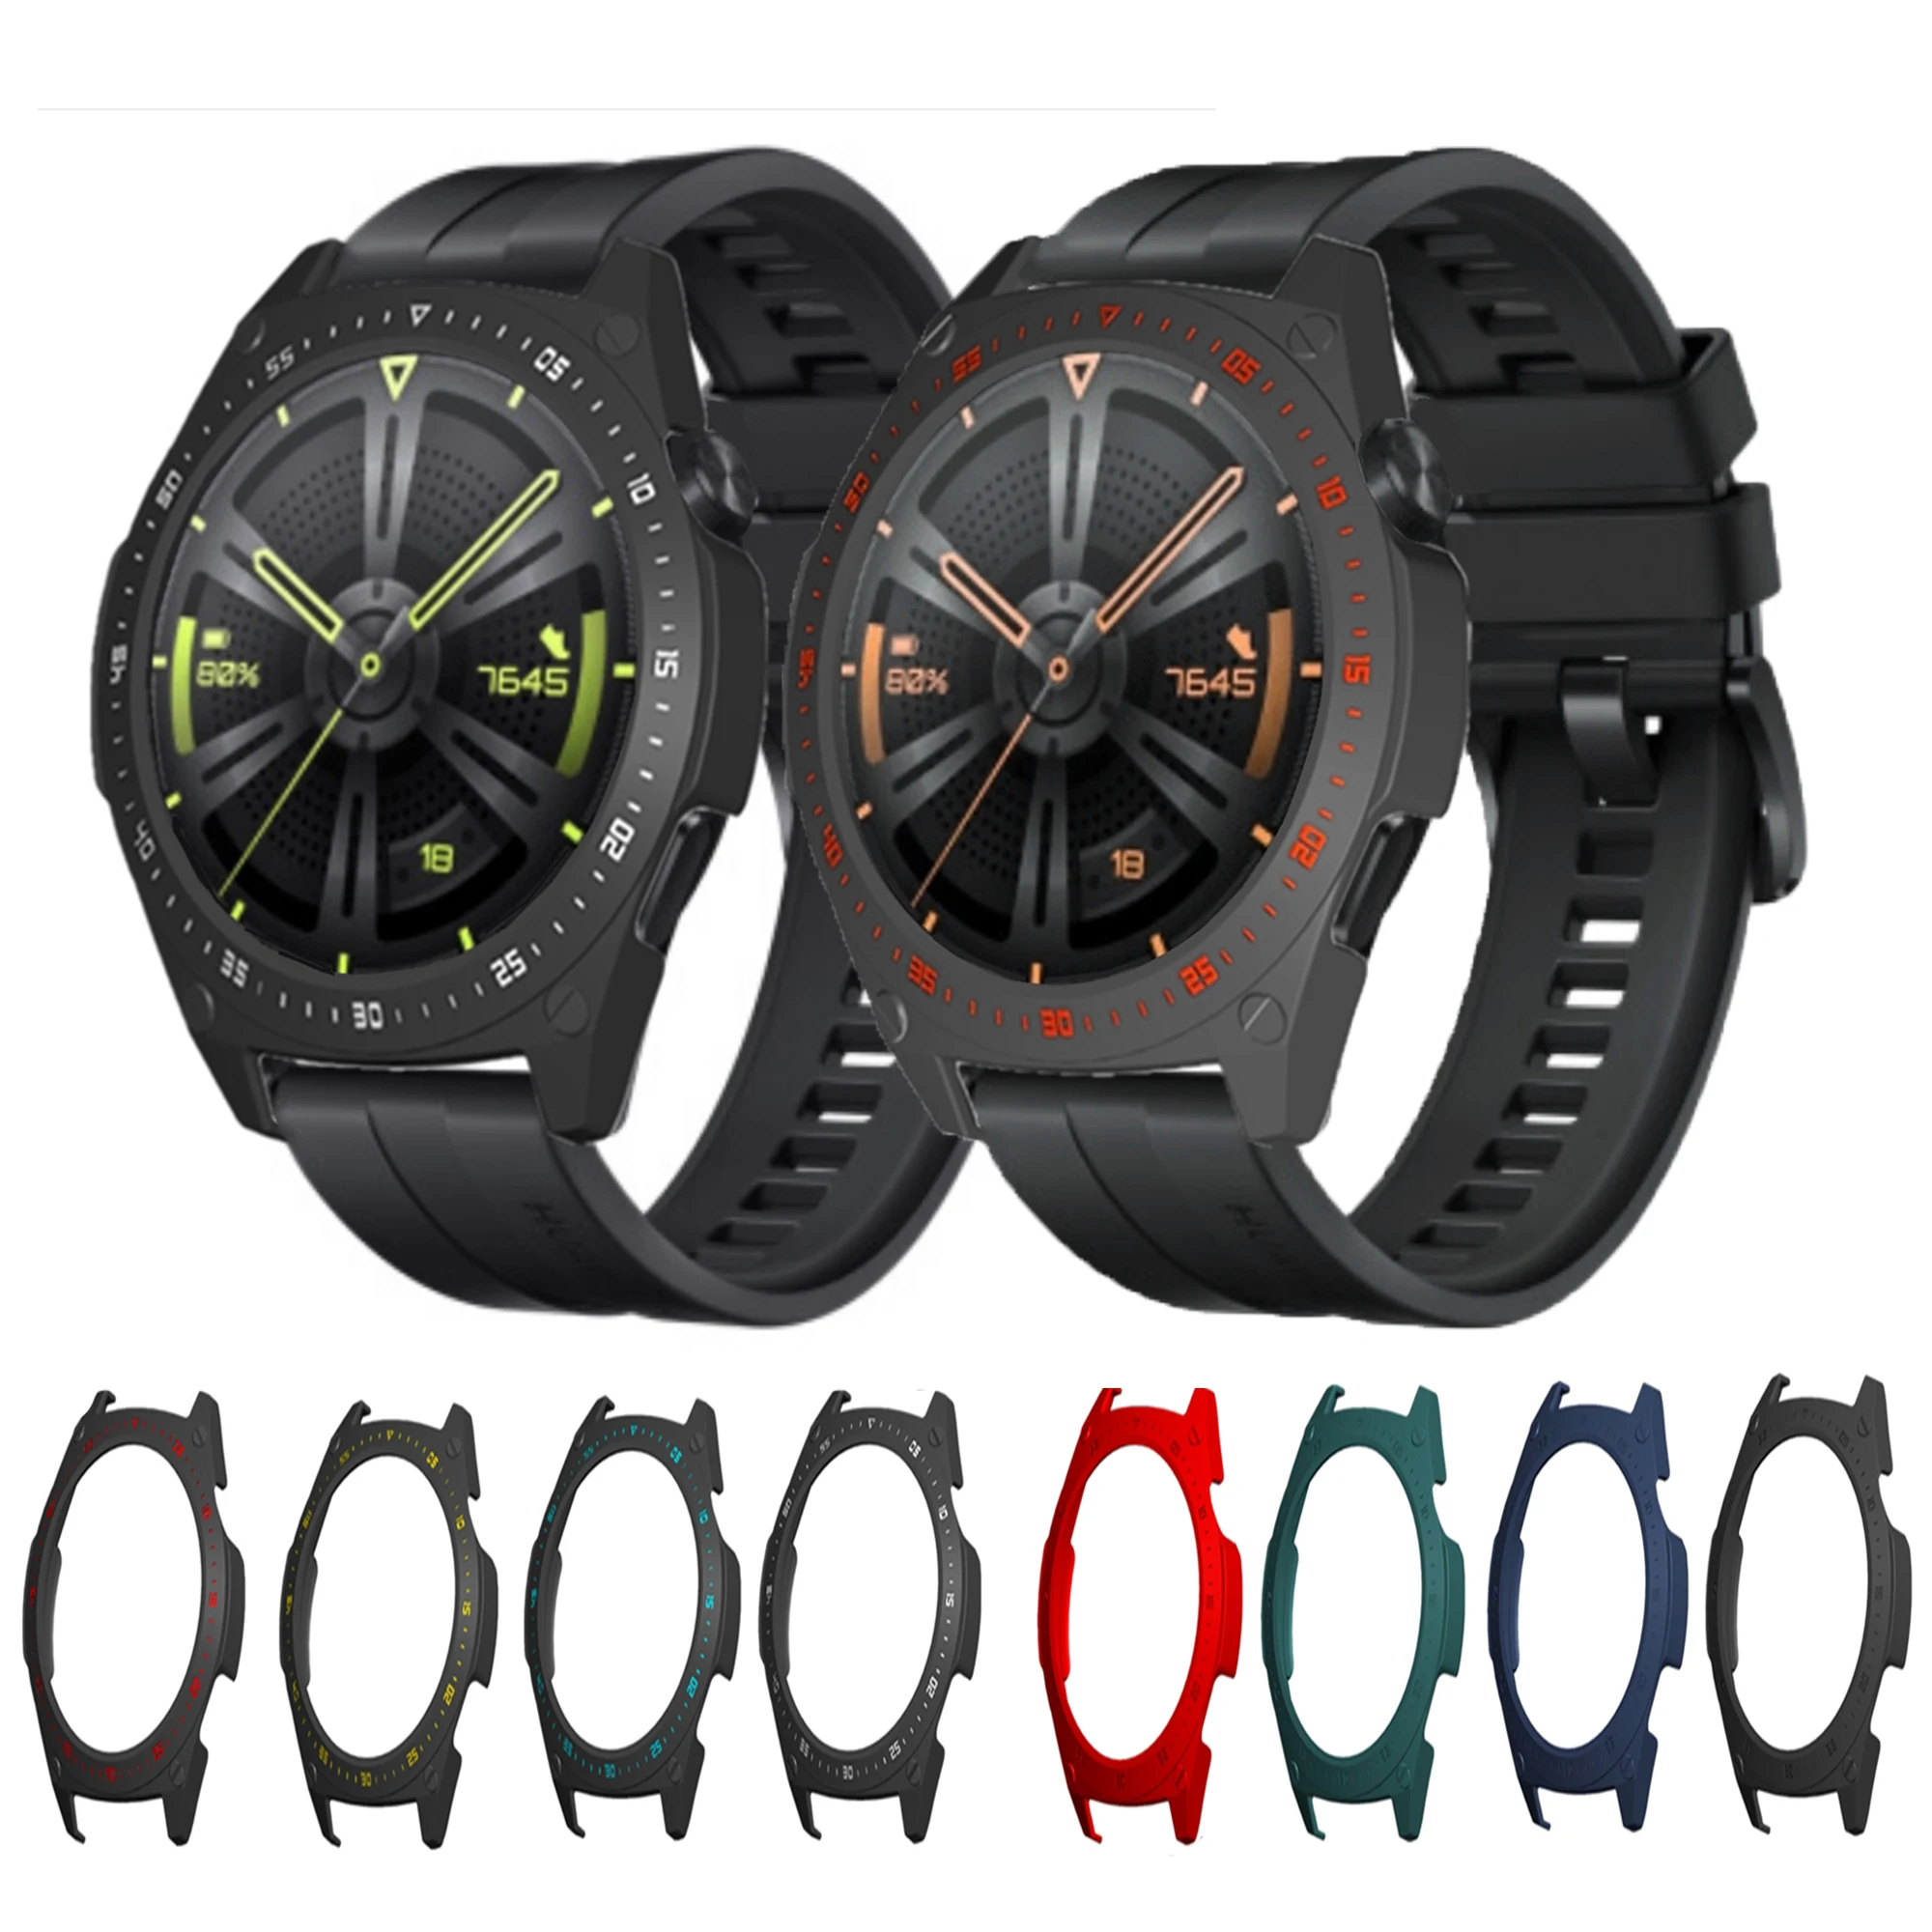 

Silicone Protective For Huawei Watch GT 3 Watchband Bezel Ring Case Protector Shell For Huawei Watch GT3 46mm Wristband Cover